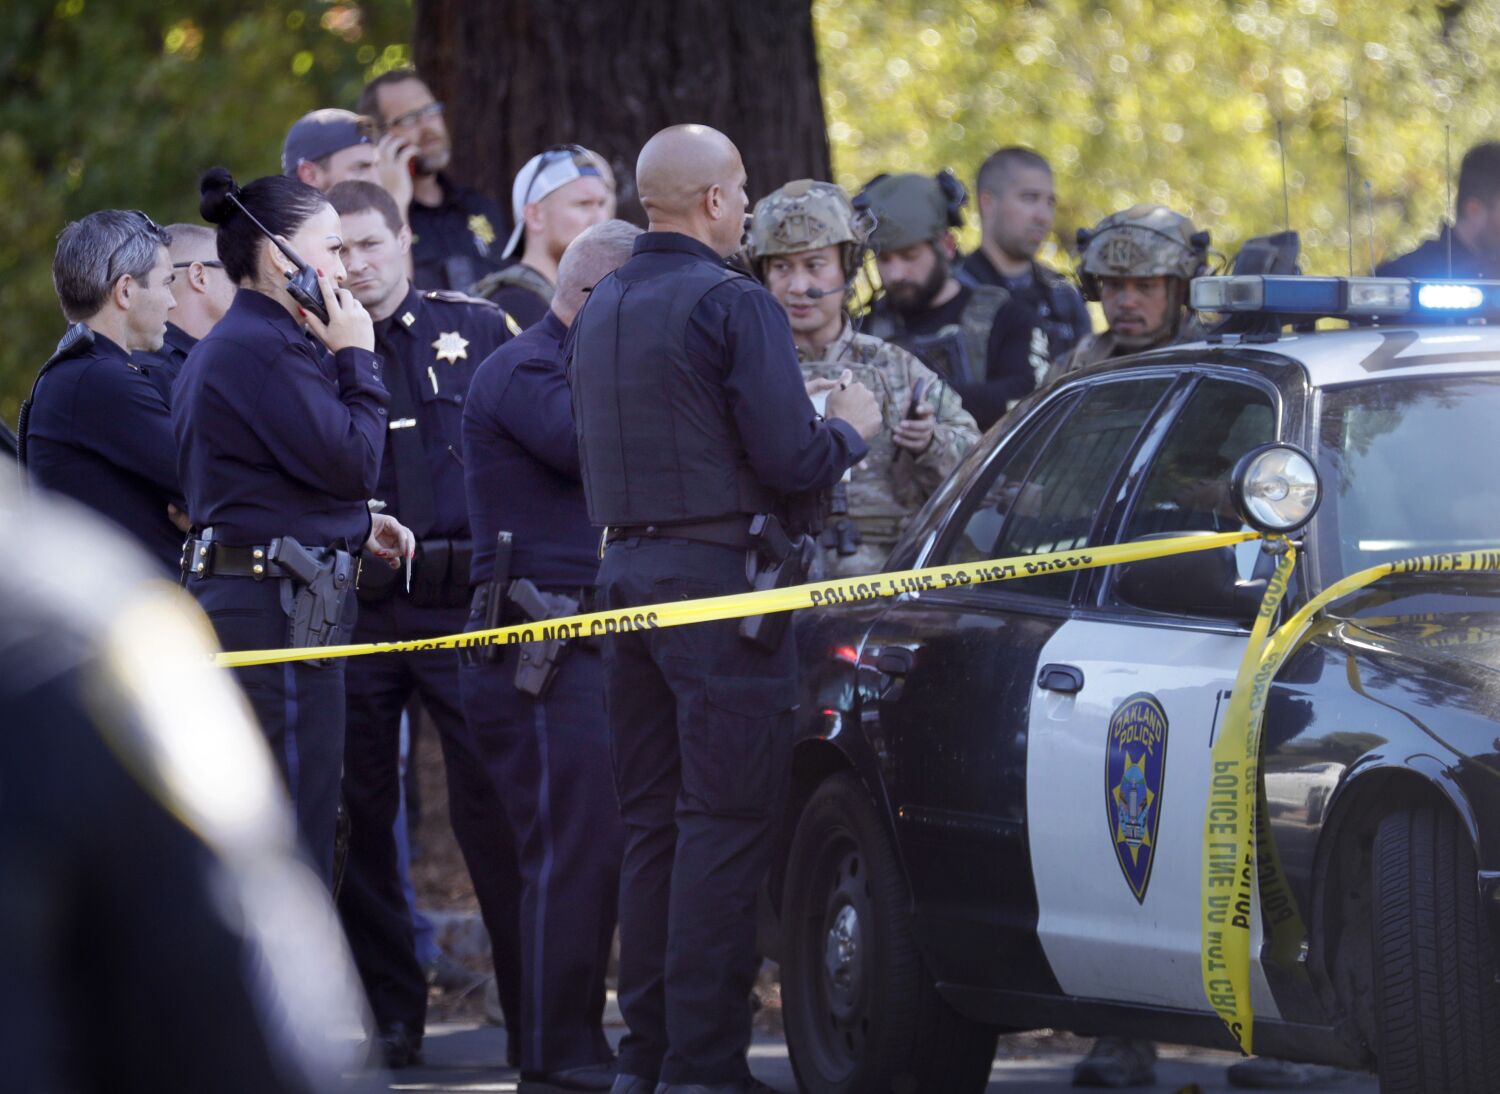 Oakland school shooting: Police search for gunman, motive in attack that wounded 6